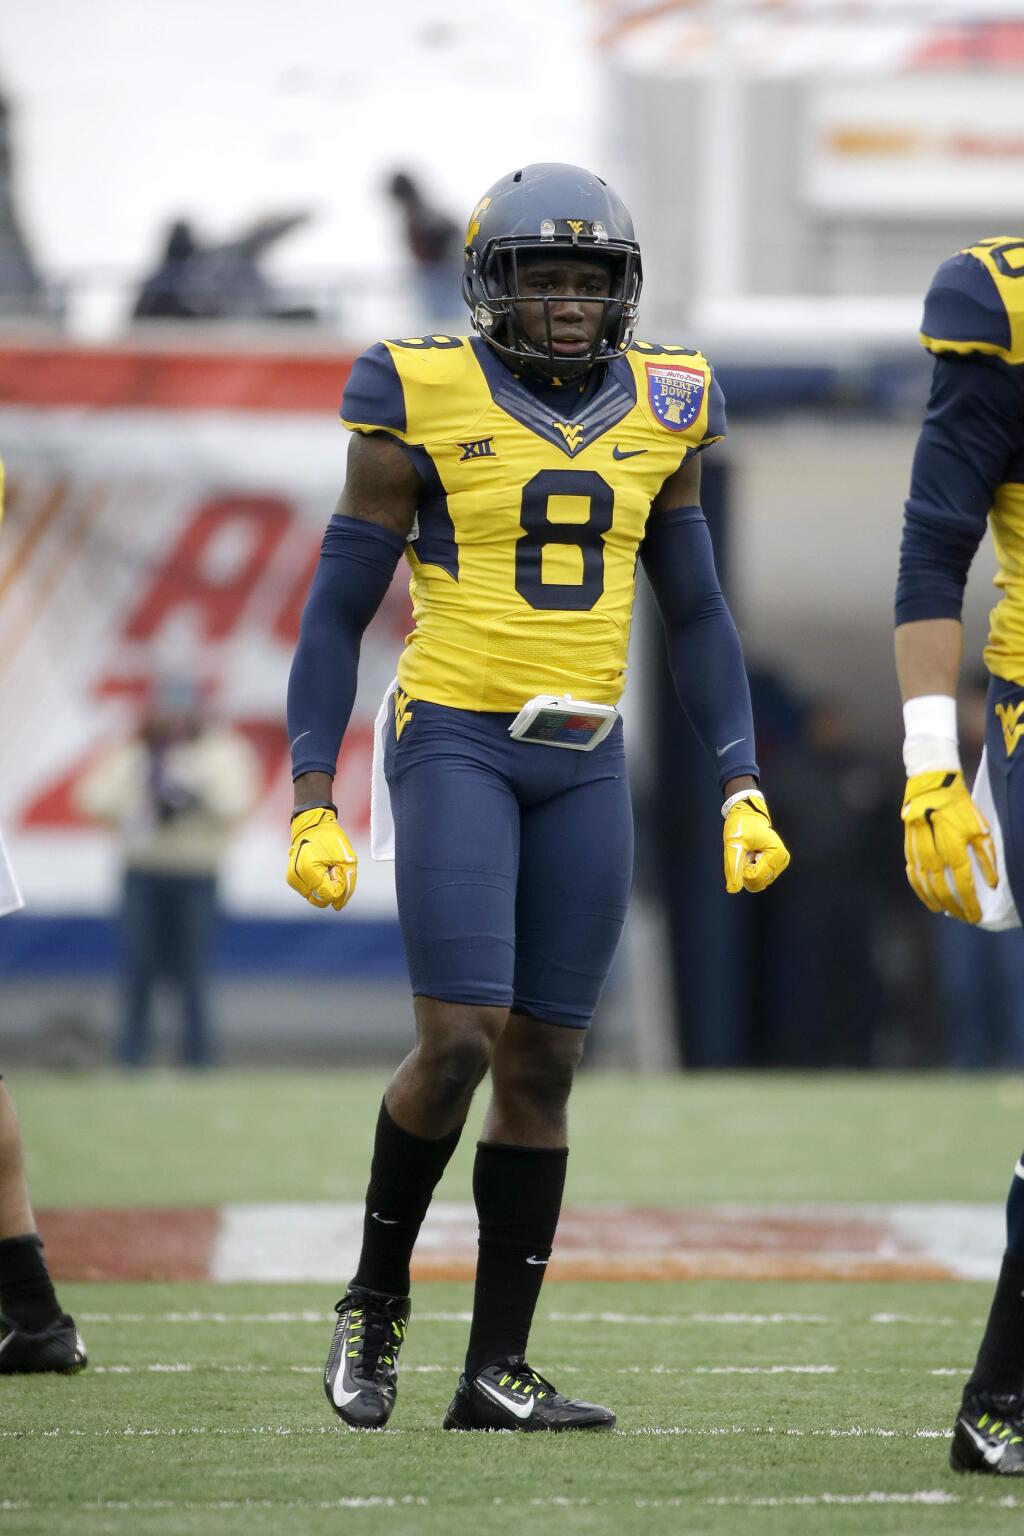 West Virginia safety Karl Joseph (8) plays against Texas A&M in the first half of the Liberty Bowl Monday, Dec. 29, 2014, in Memphis, Tenn. (AP Photo/Mark Humphrey)